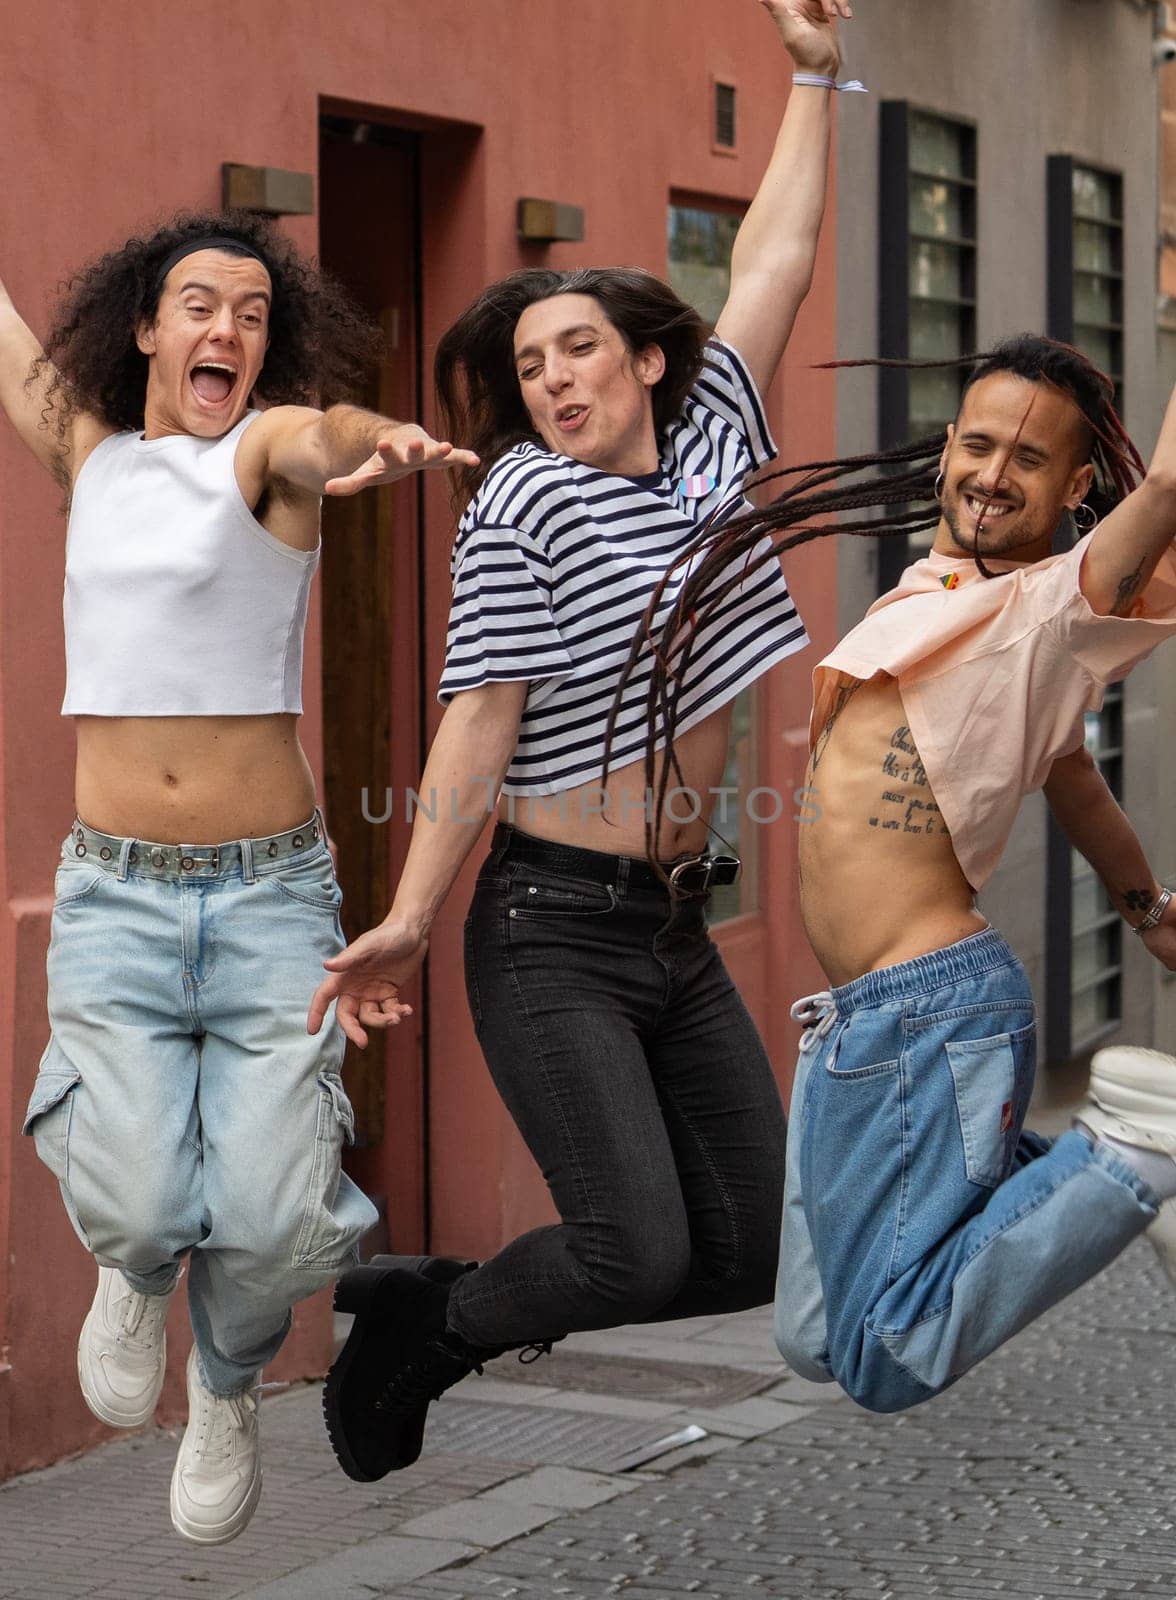 Three multuethnic gay people are excited together in Madrid city chueca street by papatonic